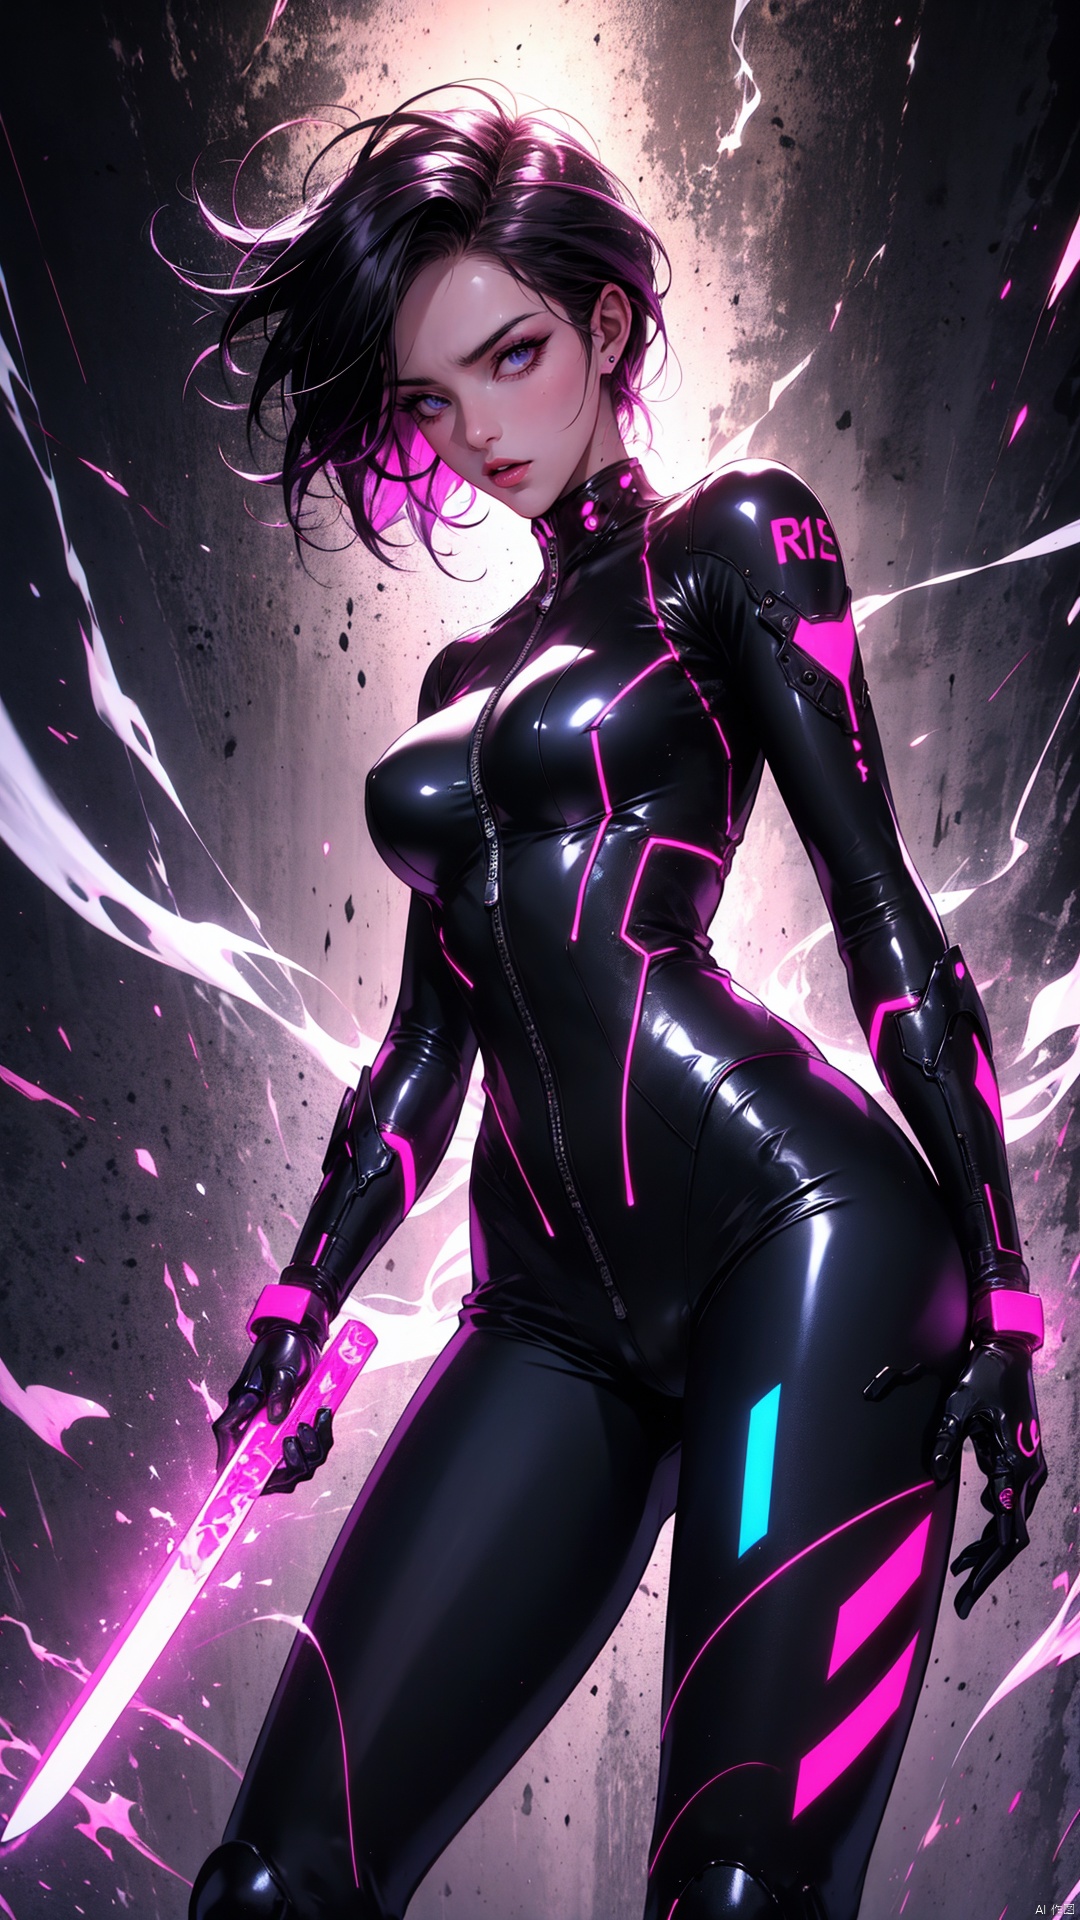 cyberpunk seductress, short purple hair, form-fitting catsuit, glowing circuit tattoos, neon-lit alleyway,半透明材质revealing lingerie underneath, thigh-high boots, leaning against graffiti wall, pouty lips, (erotic NSFW), smoking cybernetic cigarette, energy blade holstered on thigh, vibrant holographic backdrop, low-angle shot with dramatic lighting, deep focus, r1ge, blending into the digital matrix ((poakl))